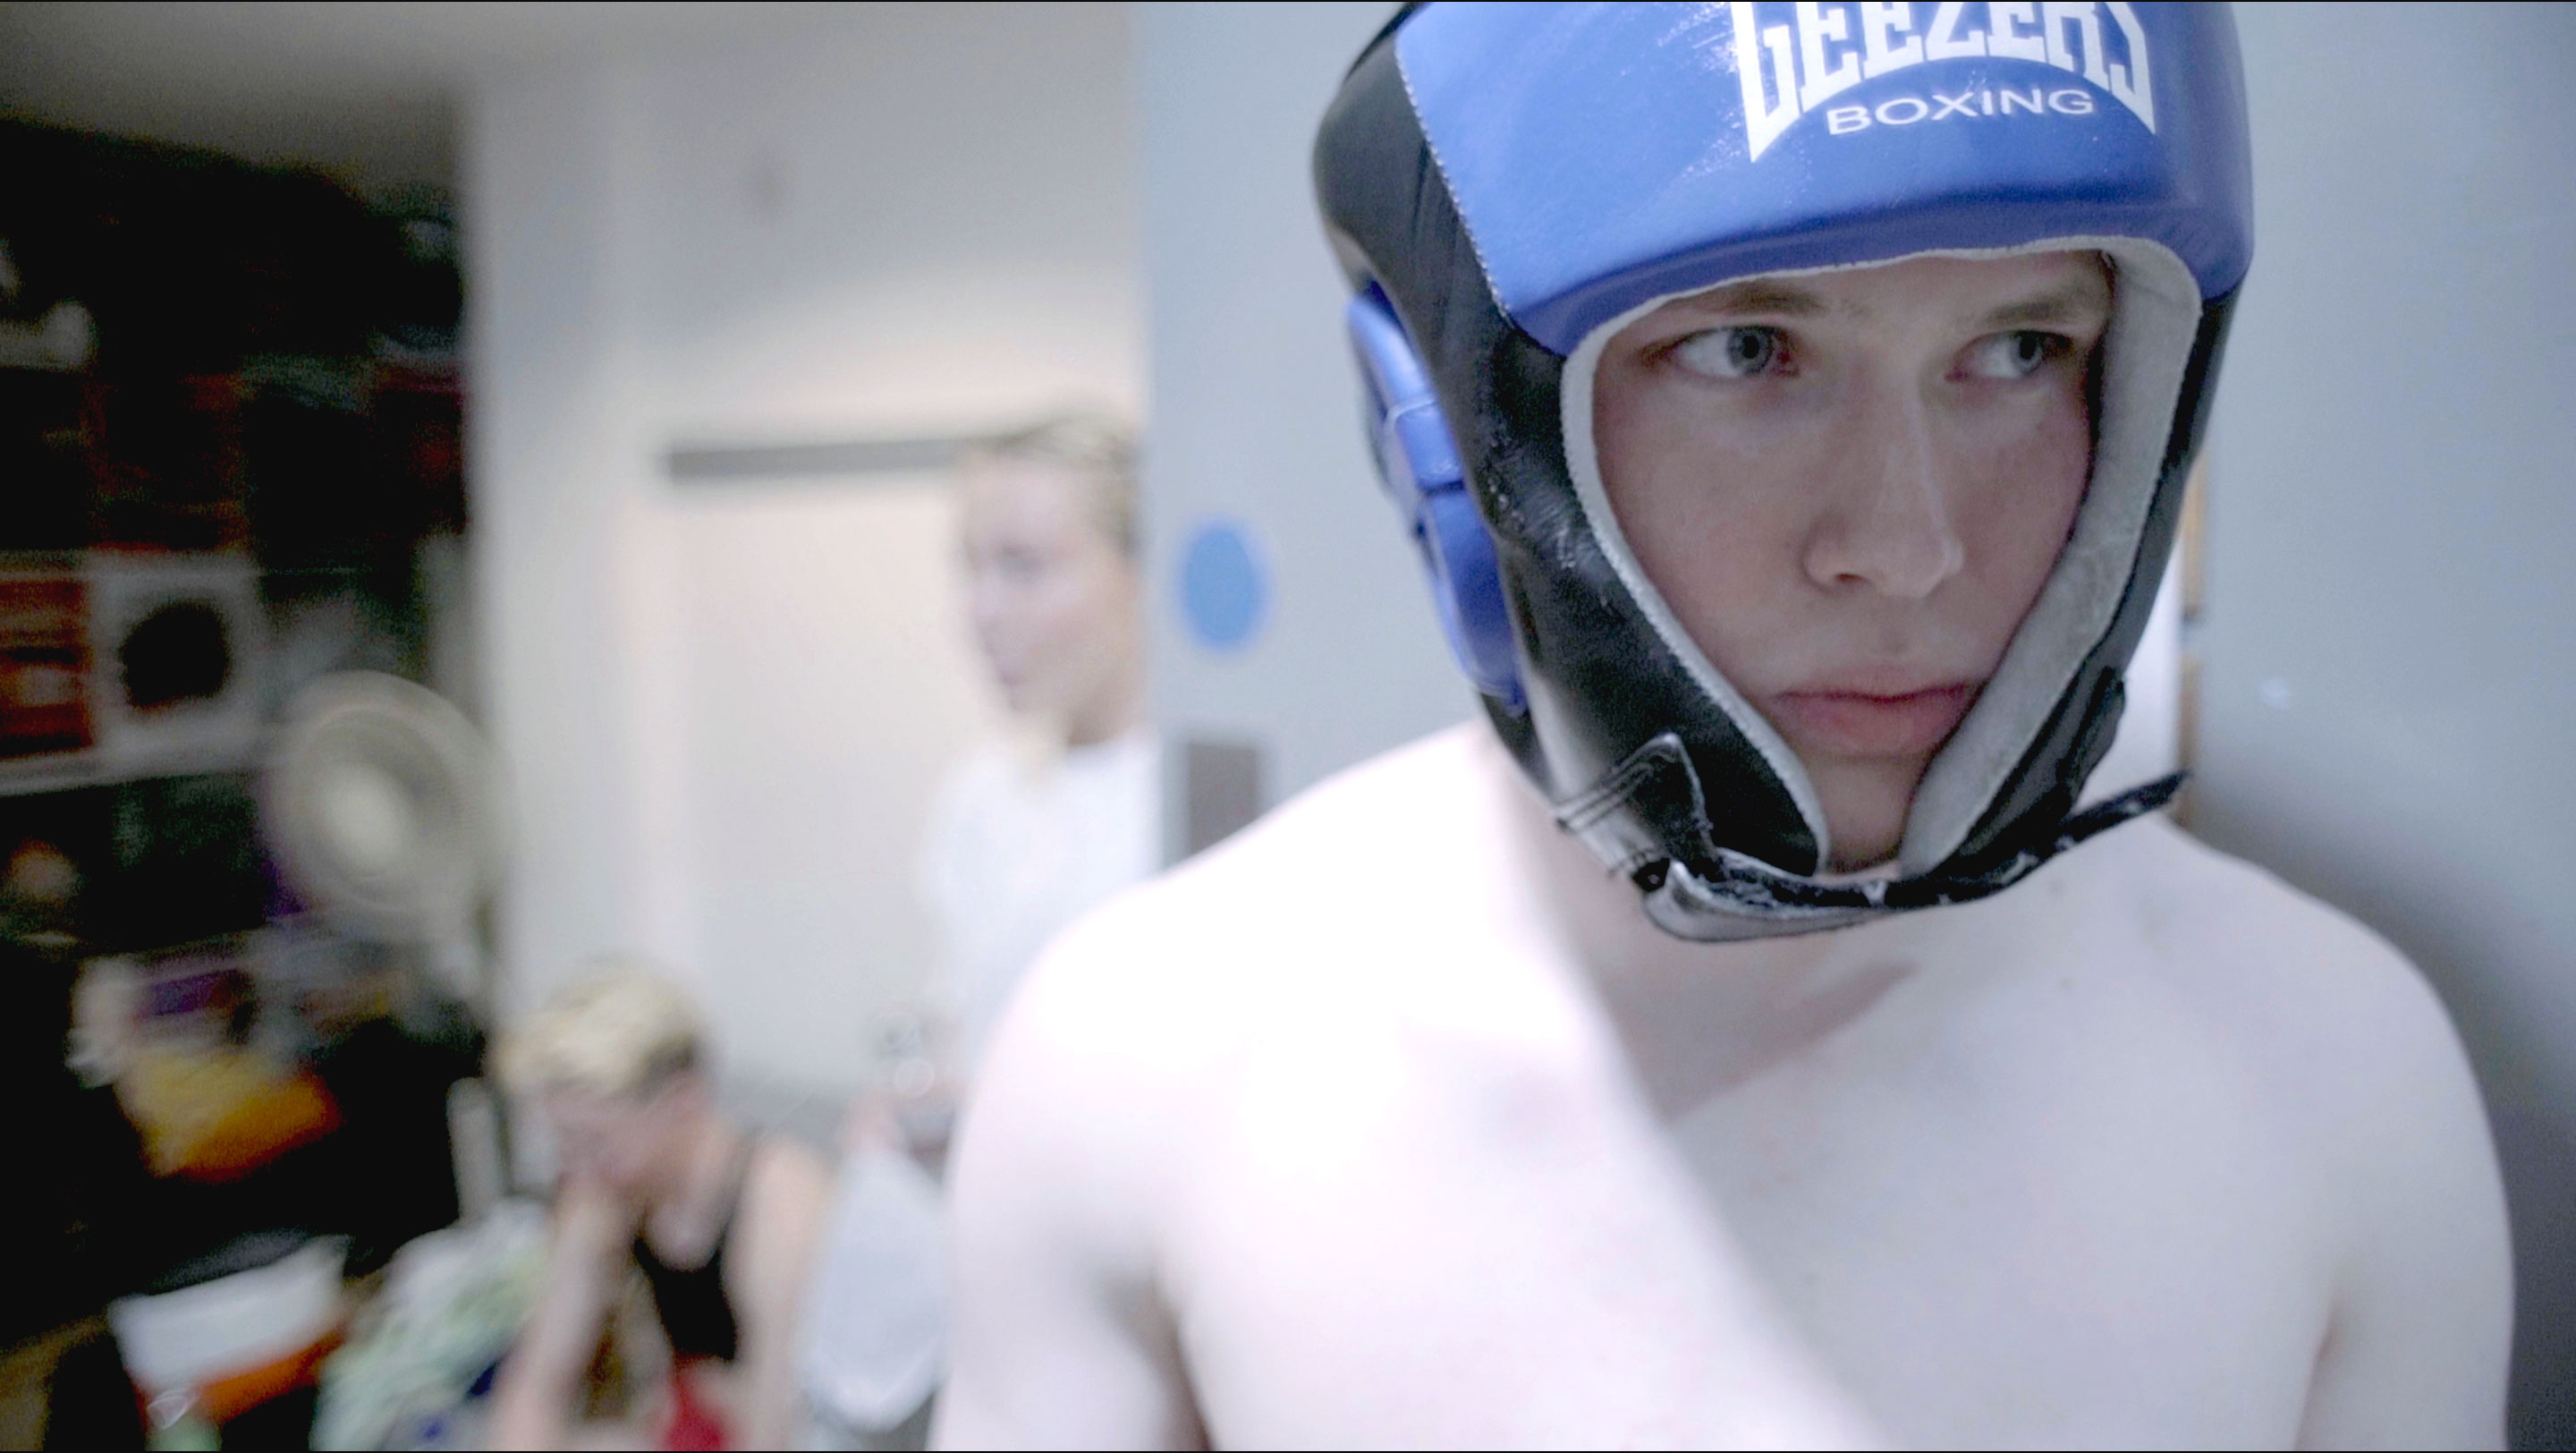 Jill from Come Out Fighting wearing a blue head guard looking determined walking in a office room.